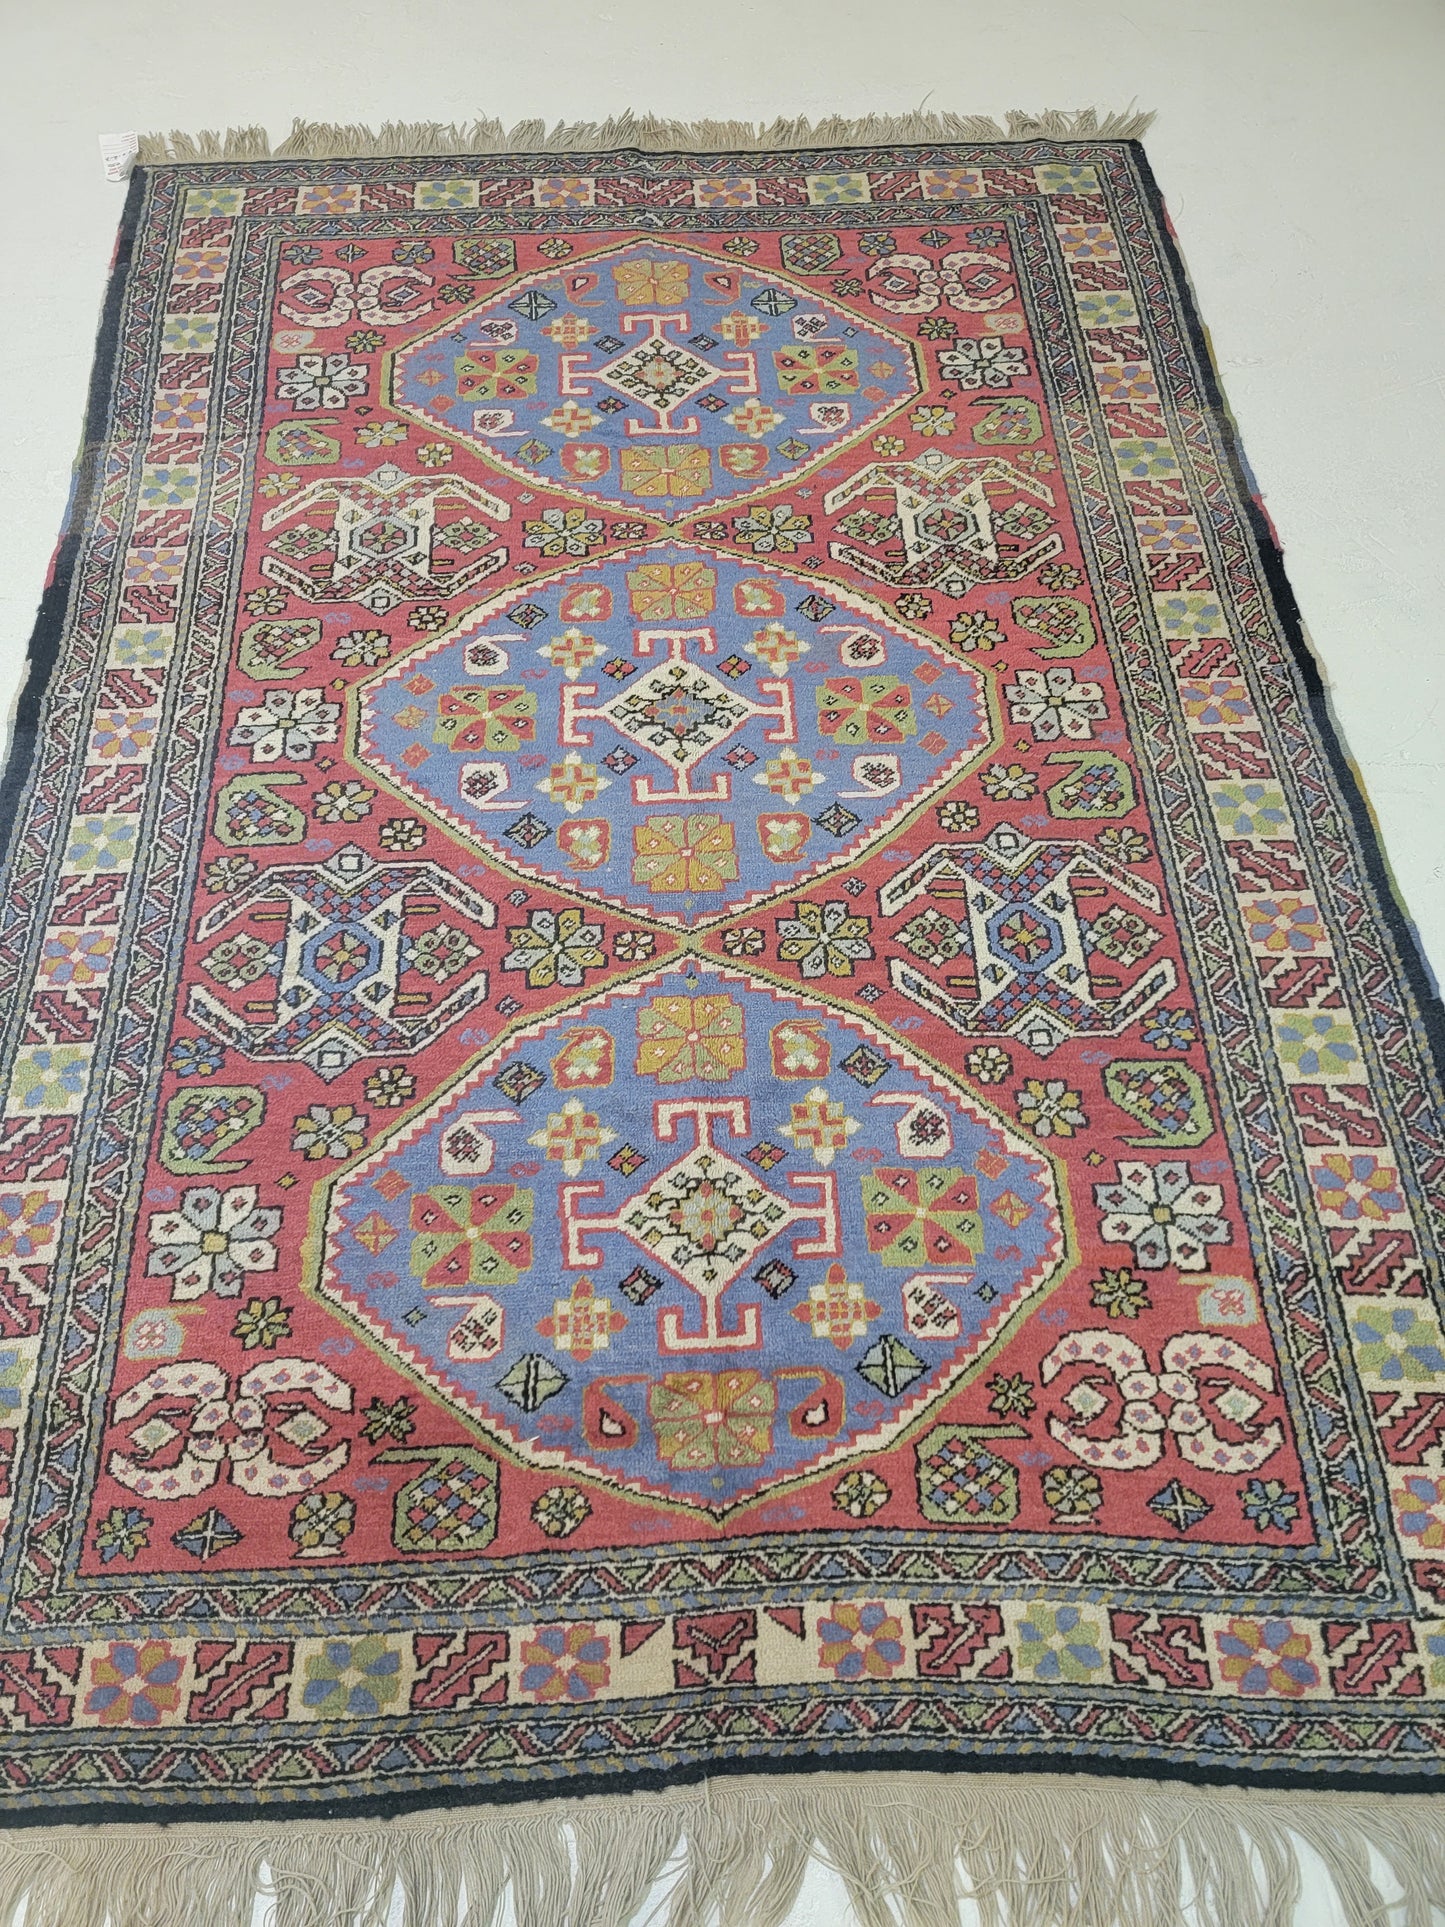 Antique Hand-Knotted Wool Area Rug Kazak 4'7" x 6'7"